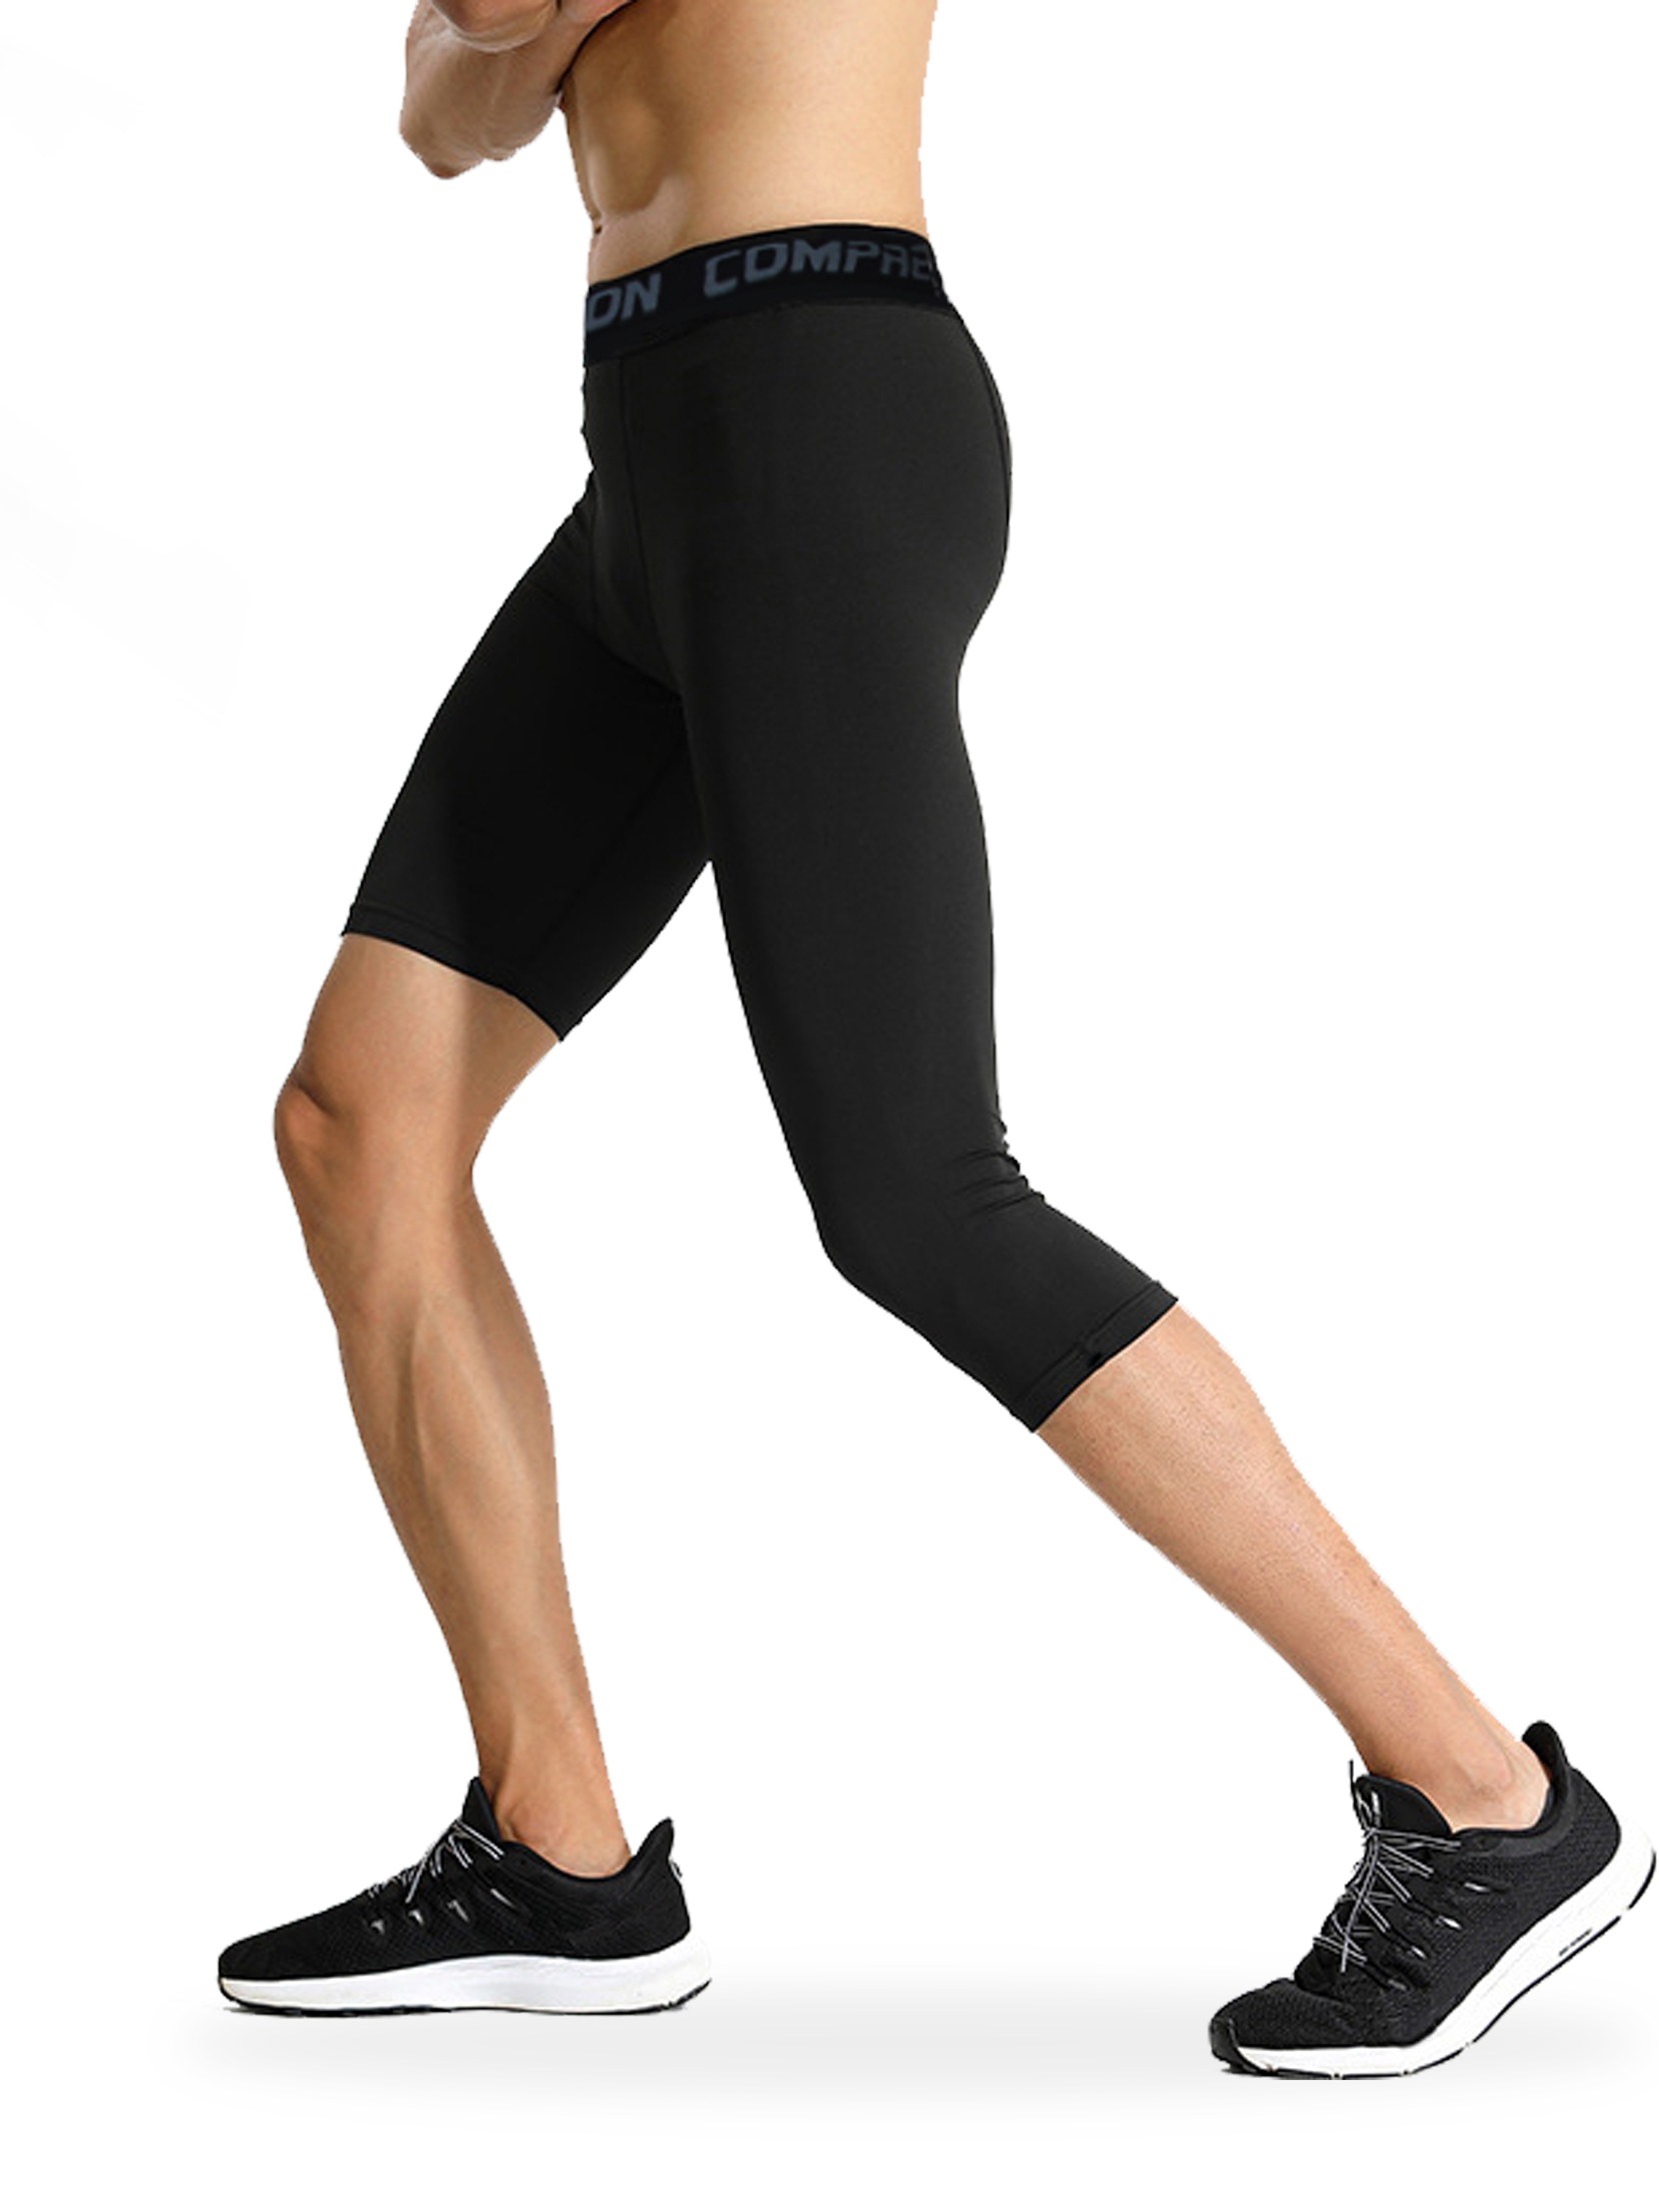 Mens One Leg Leggings, 3/4 Compression Pants, Base Layer Legging Tights  Wick Sweat Away Quickly for Outdoor Sports